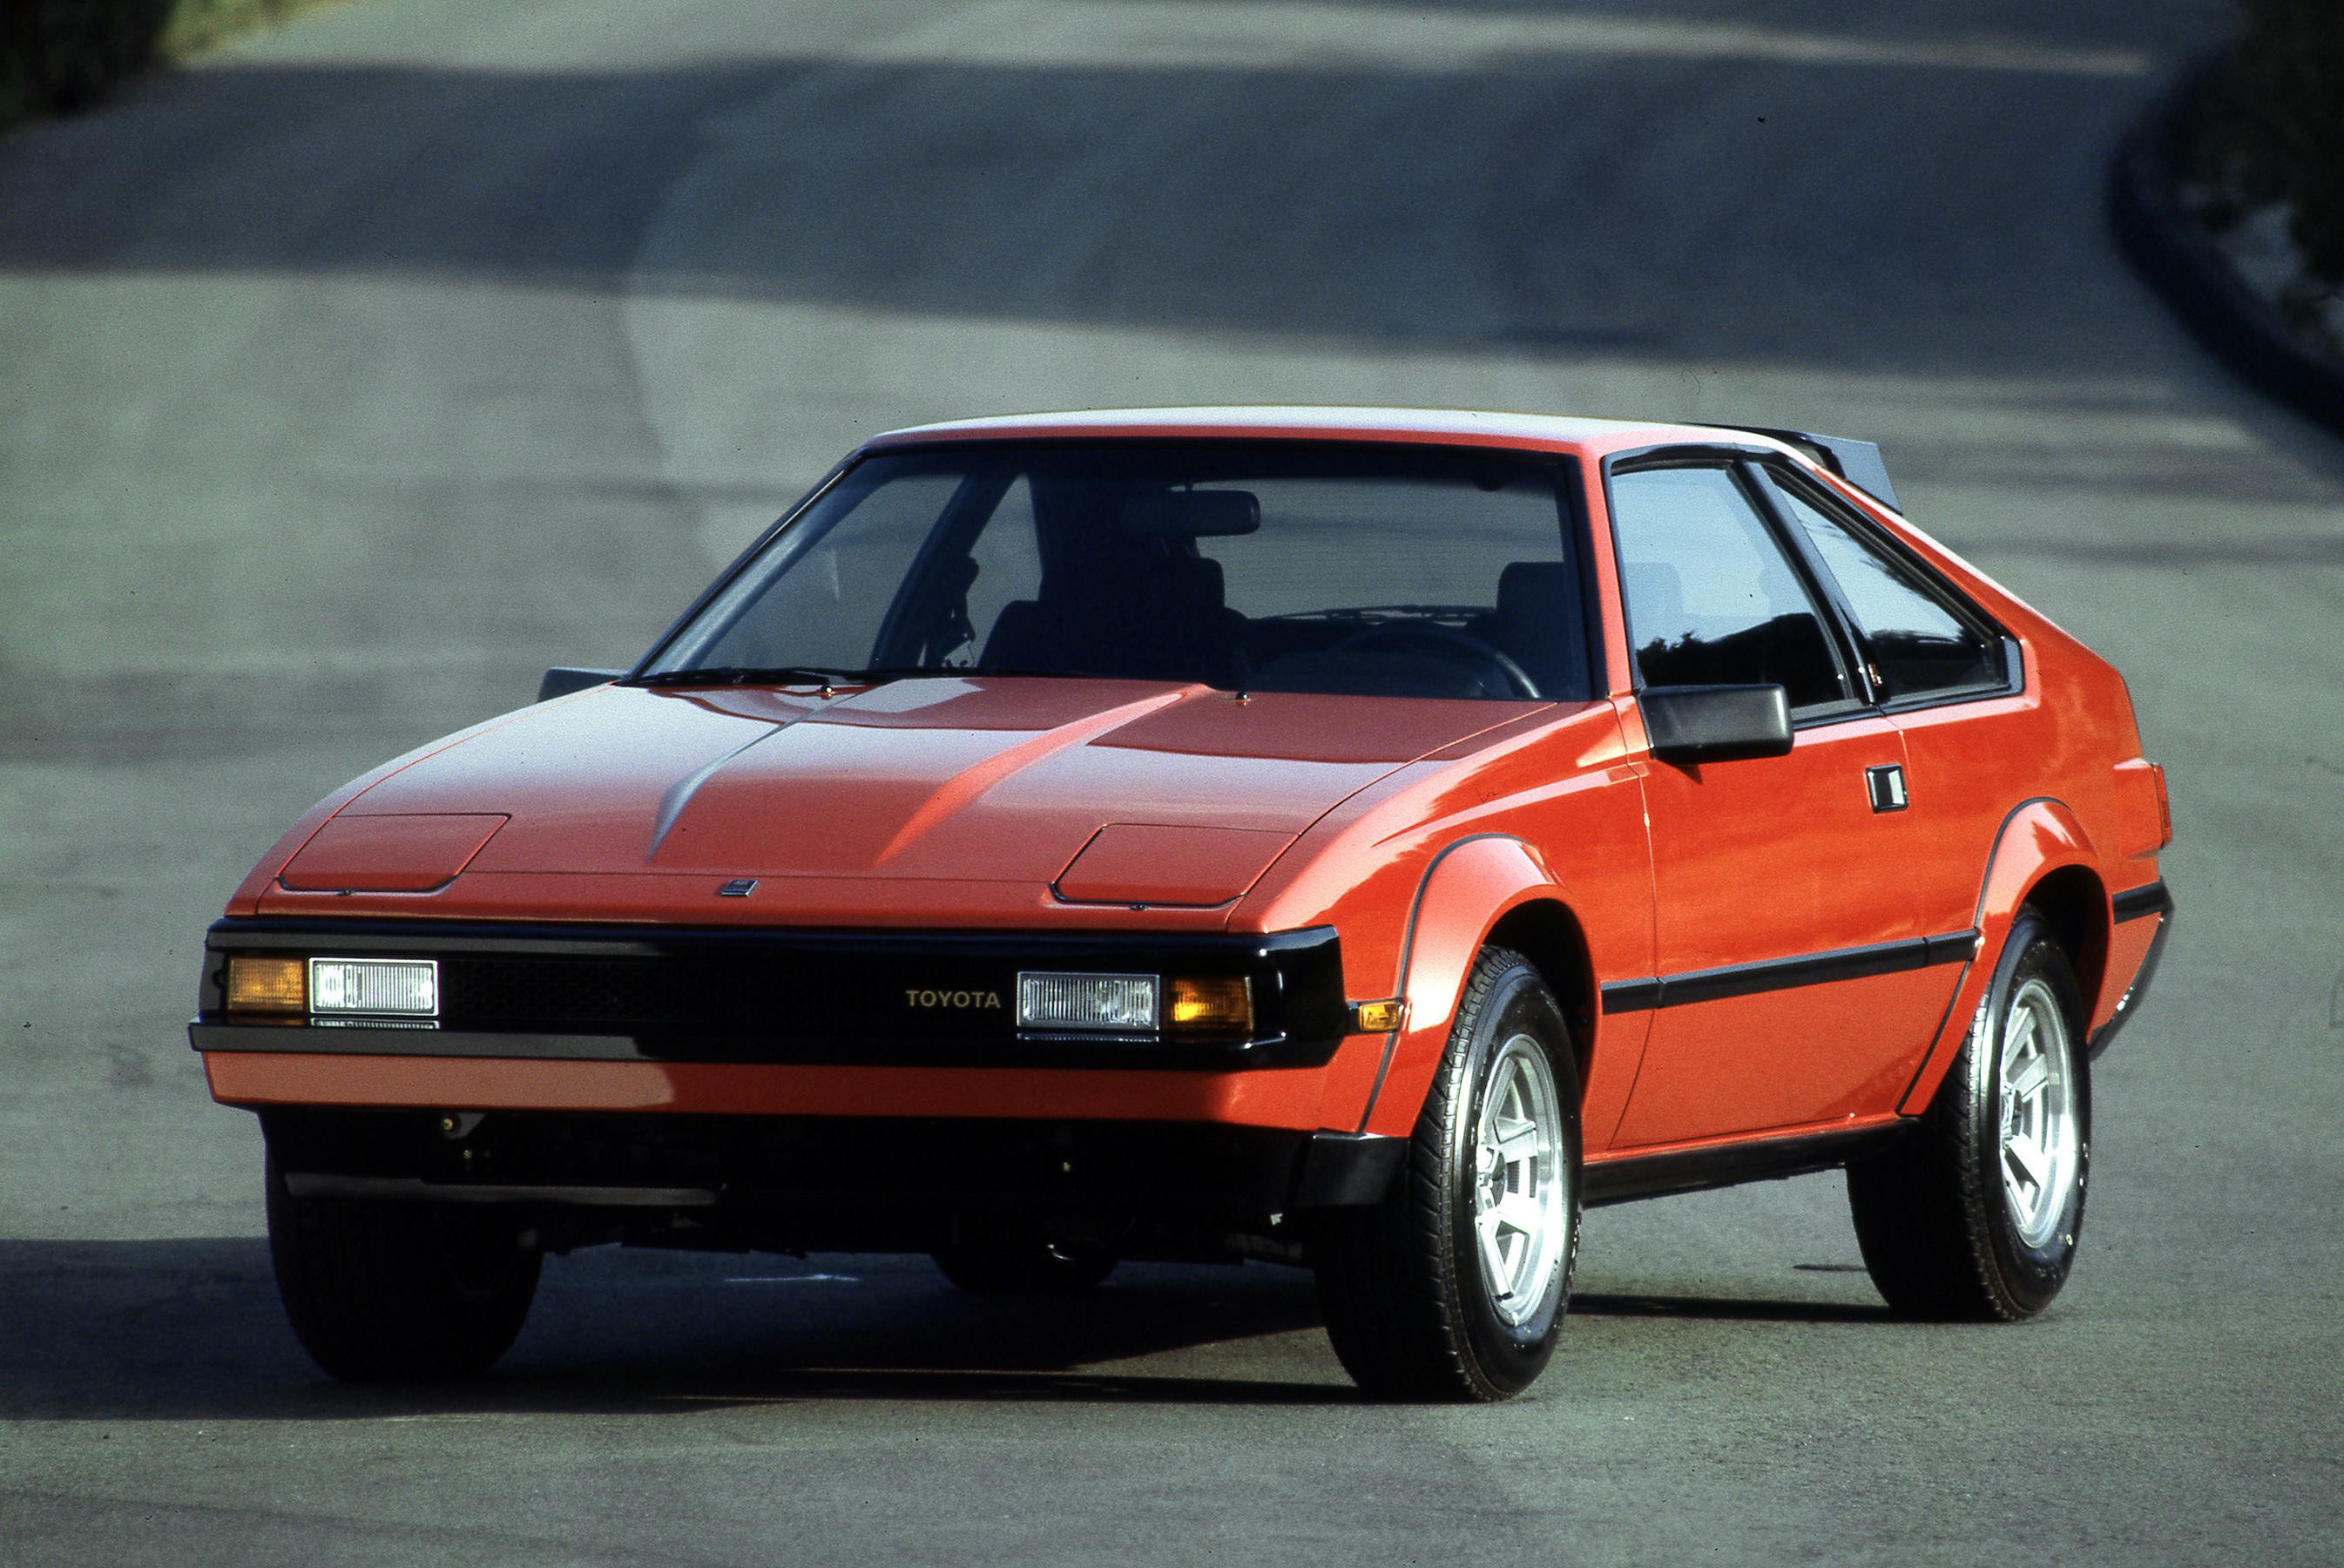 The Celica that birthed the Supra